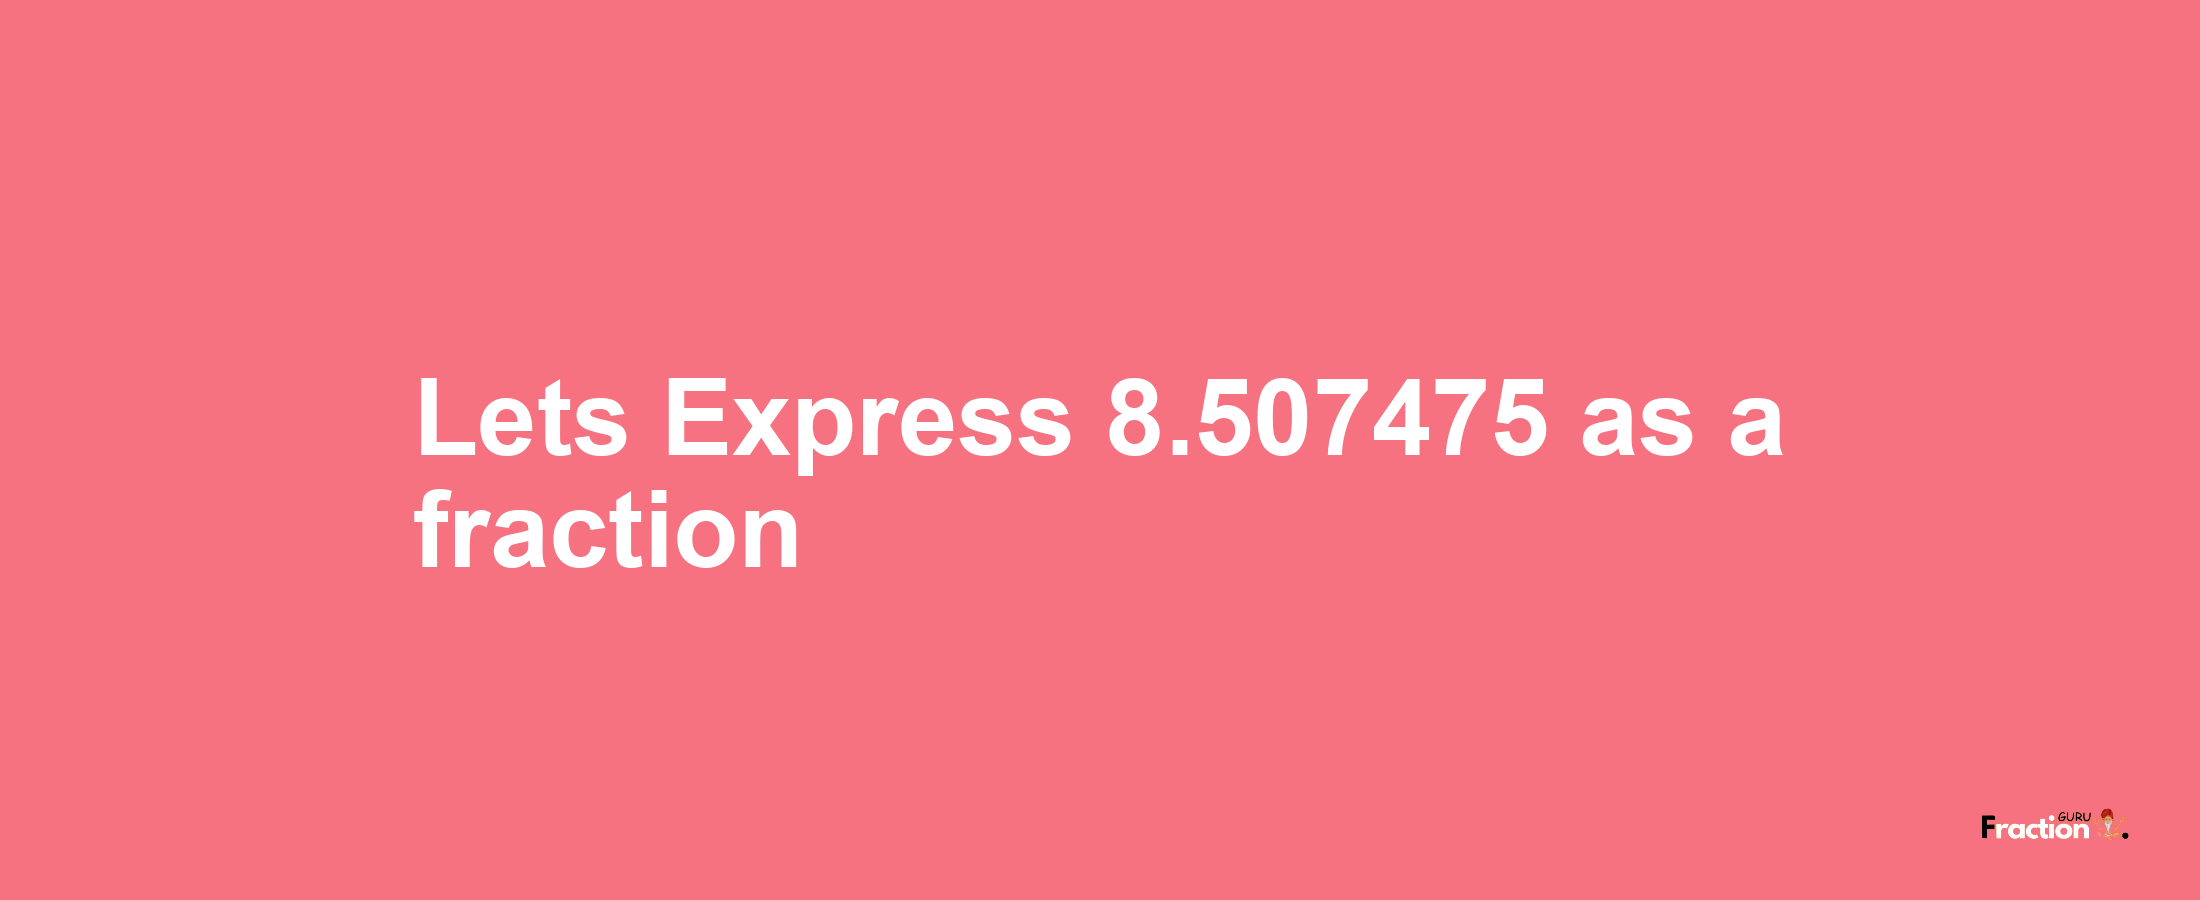 Lets Express 8.507475 as afraction